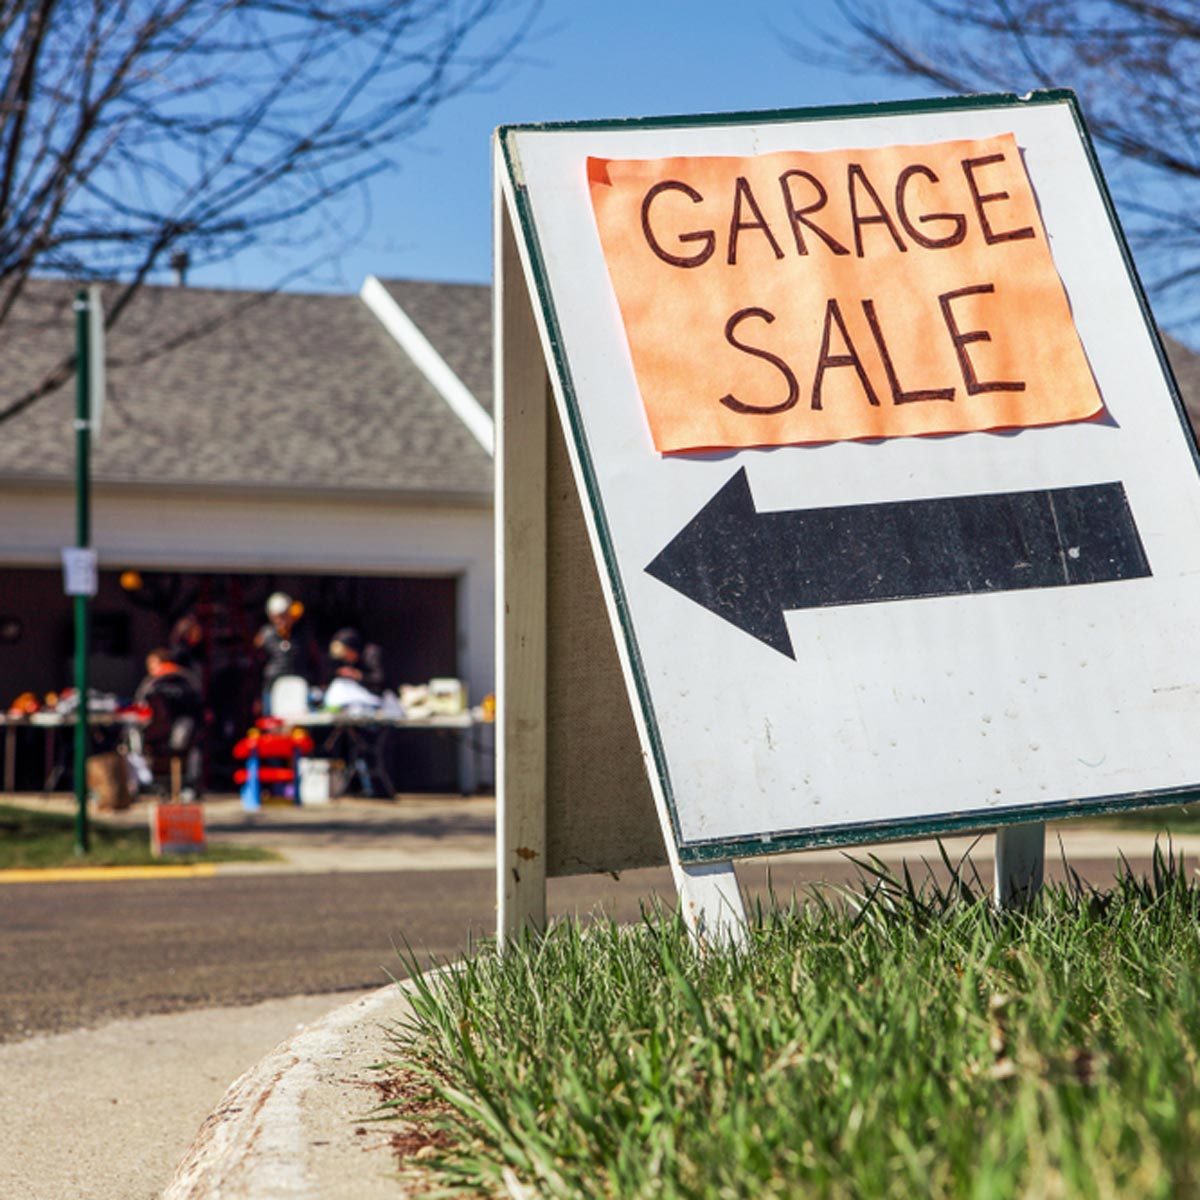 When The Best Time To Have a Garage Sale?